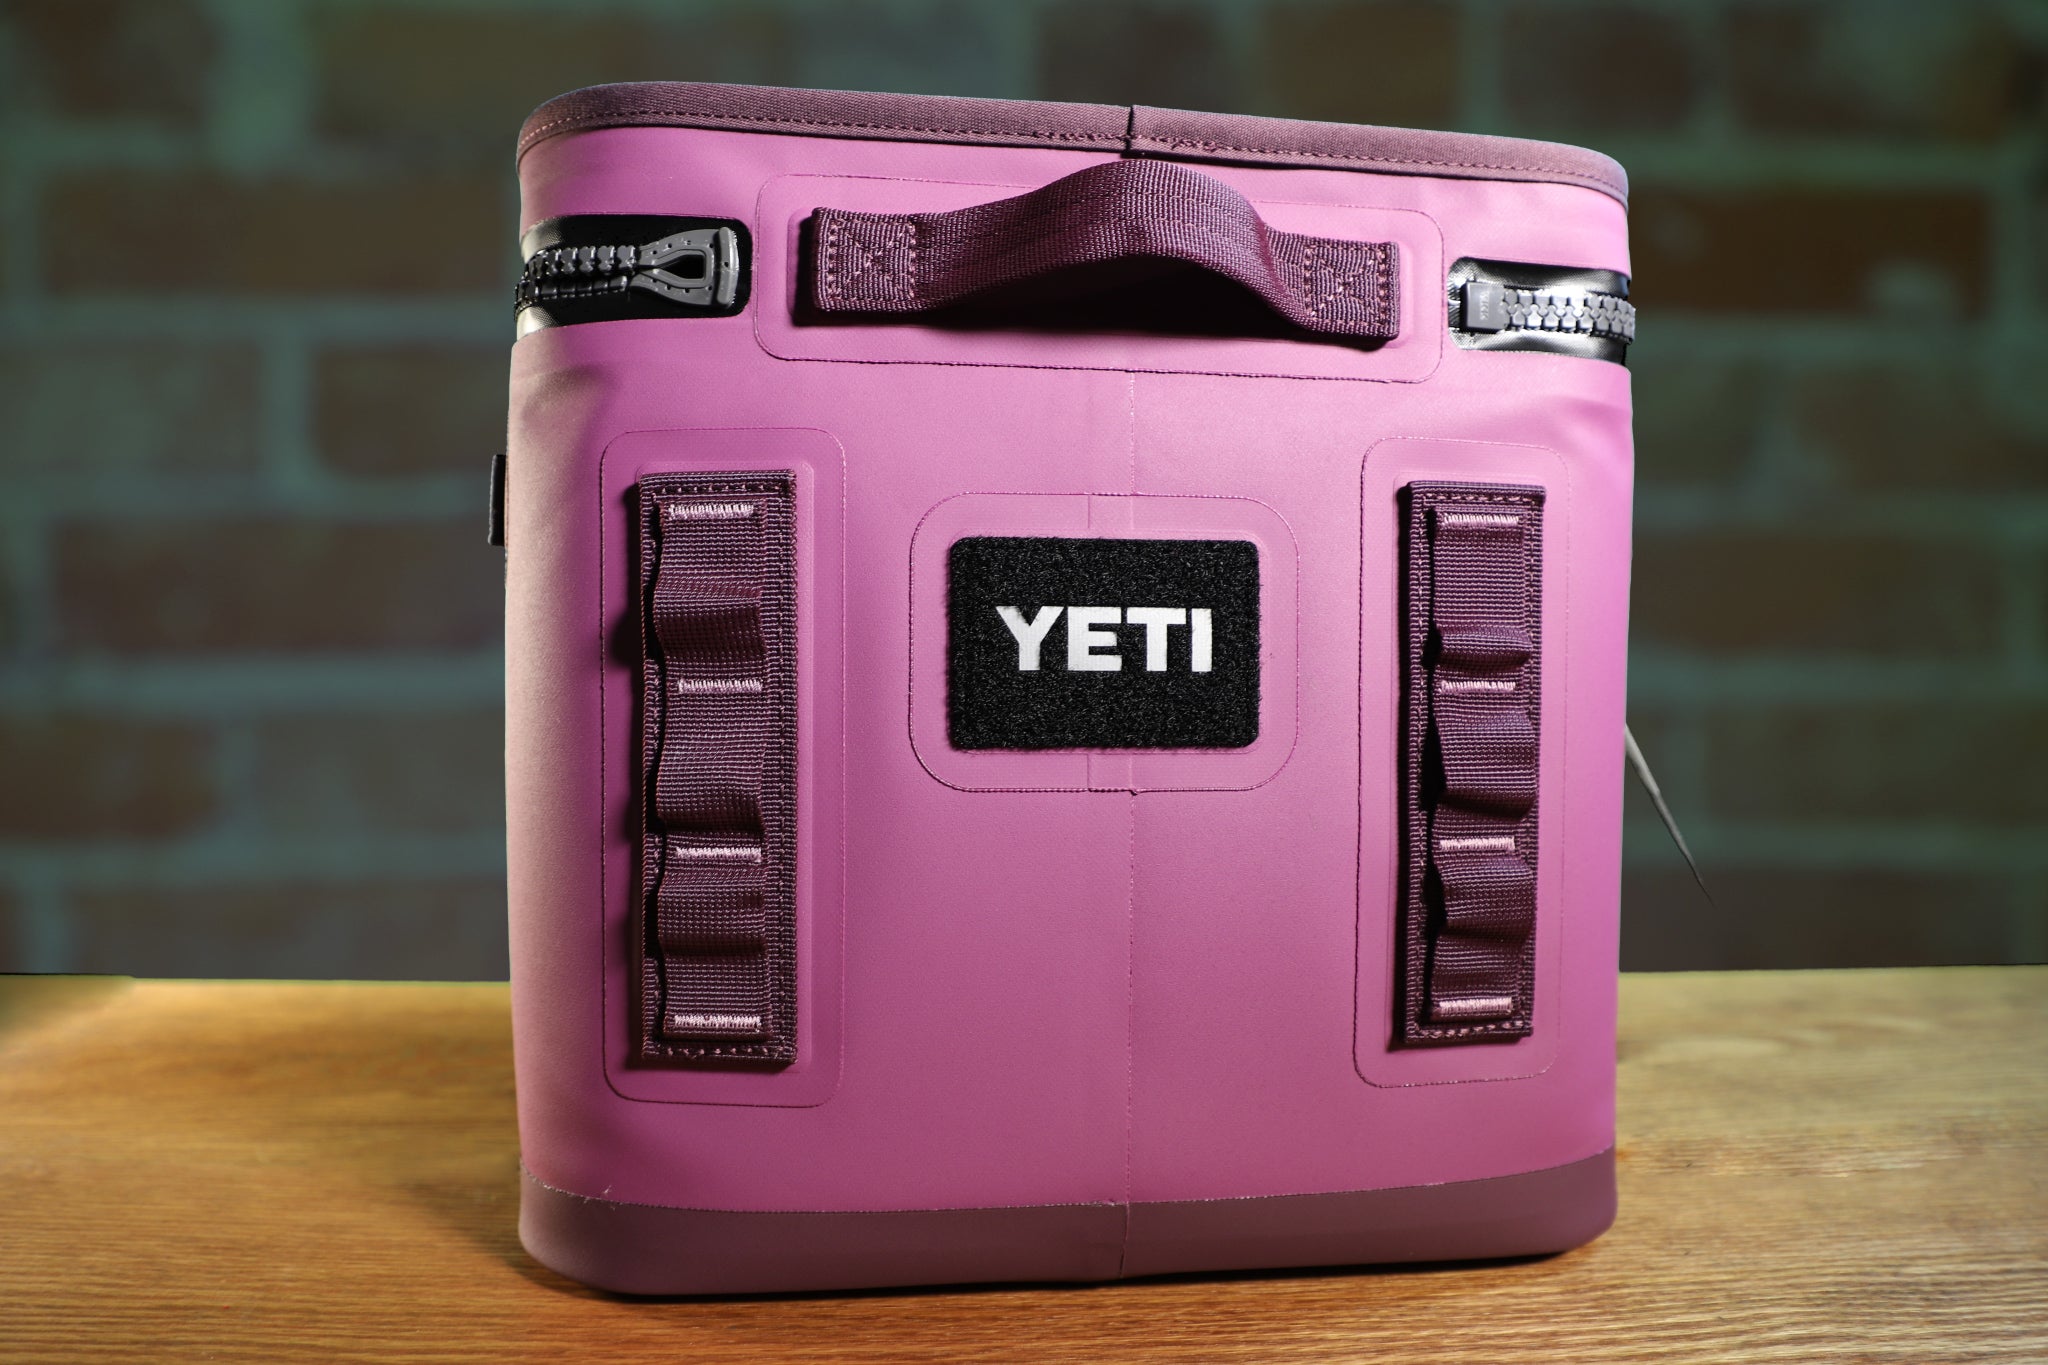 YETI Hopper Flip 12: The Portable Cooler That's Anything But Soft